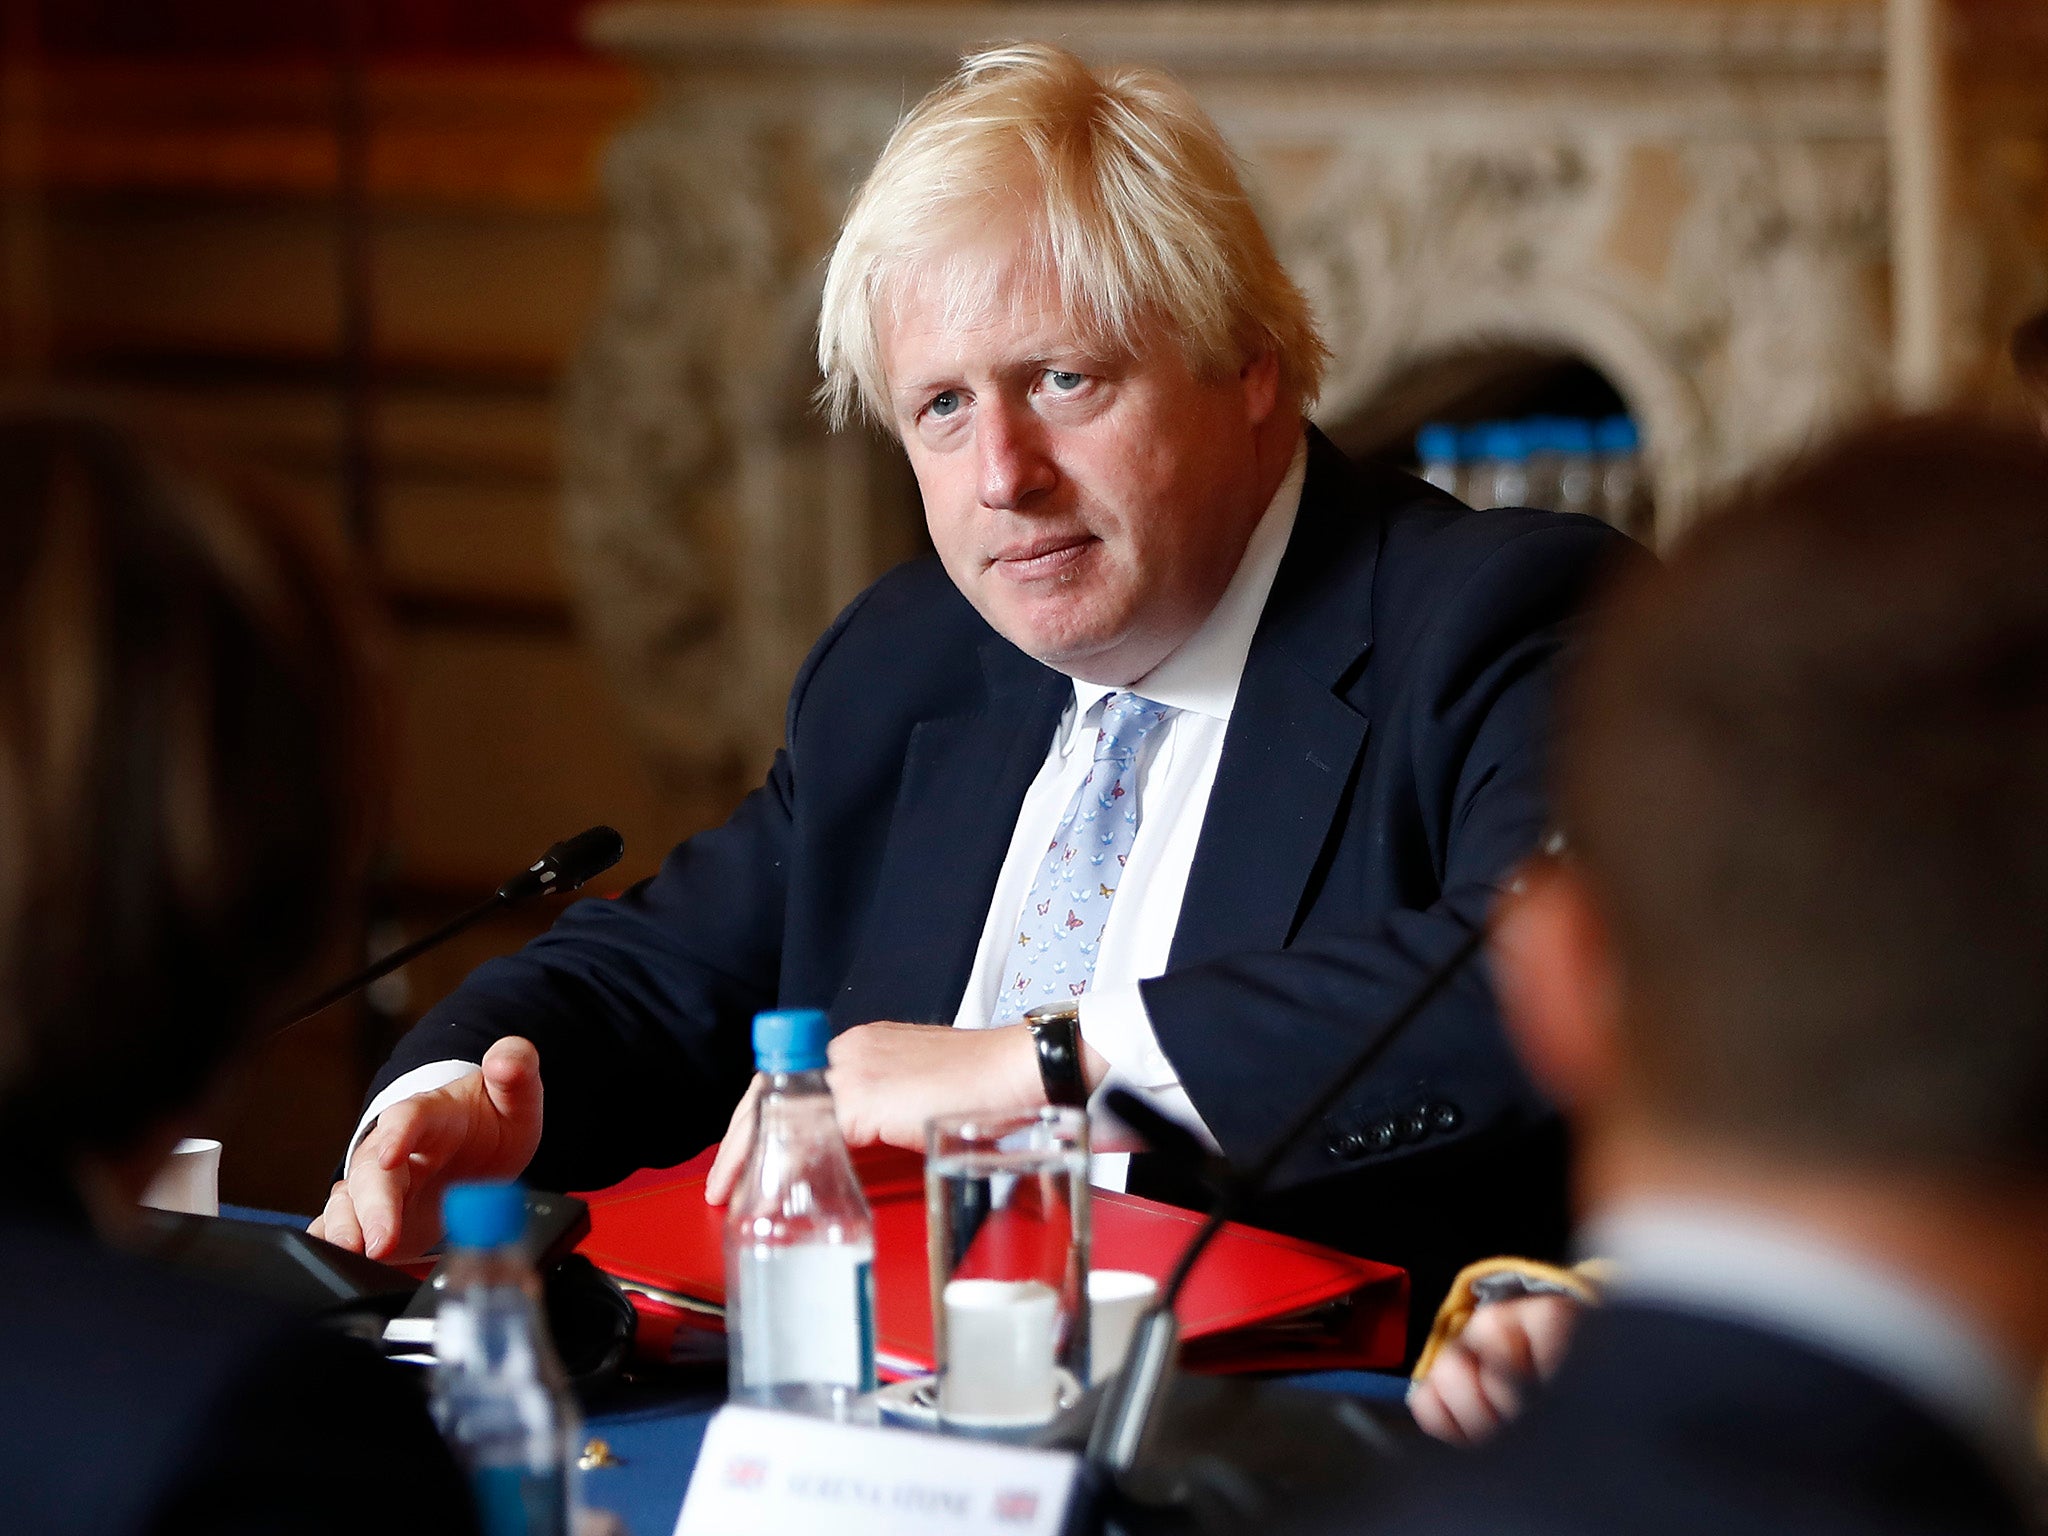 Boris Johnson said Brexit will enable the UK to be 'the greatest country on earth'